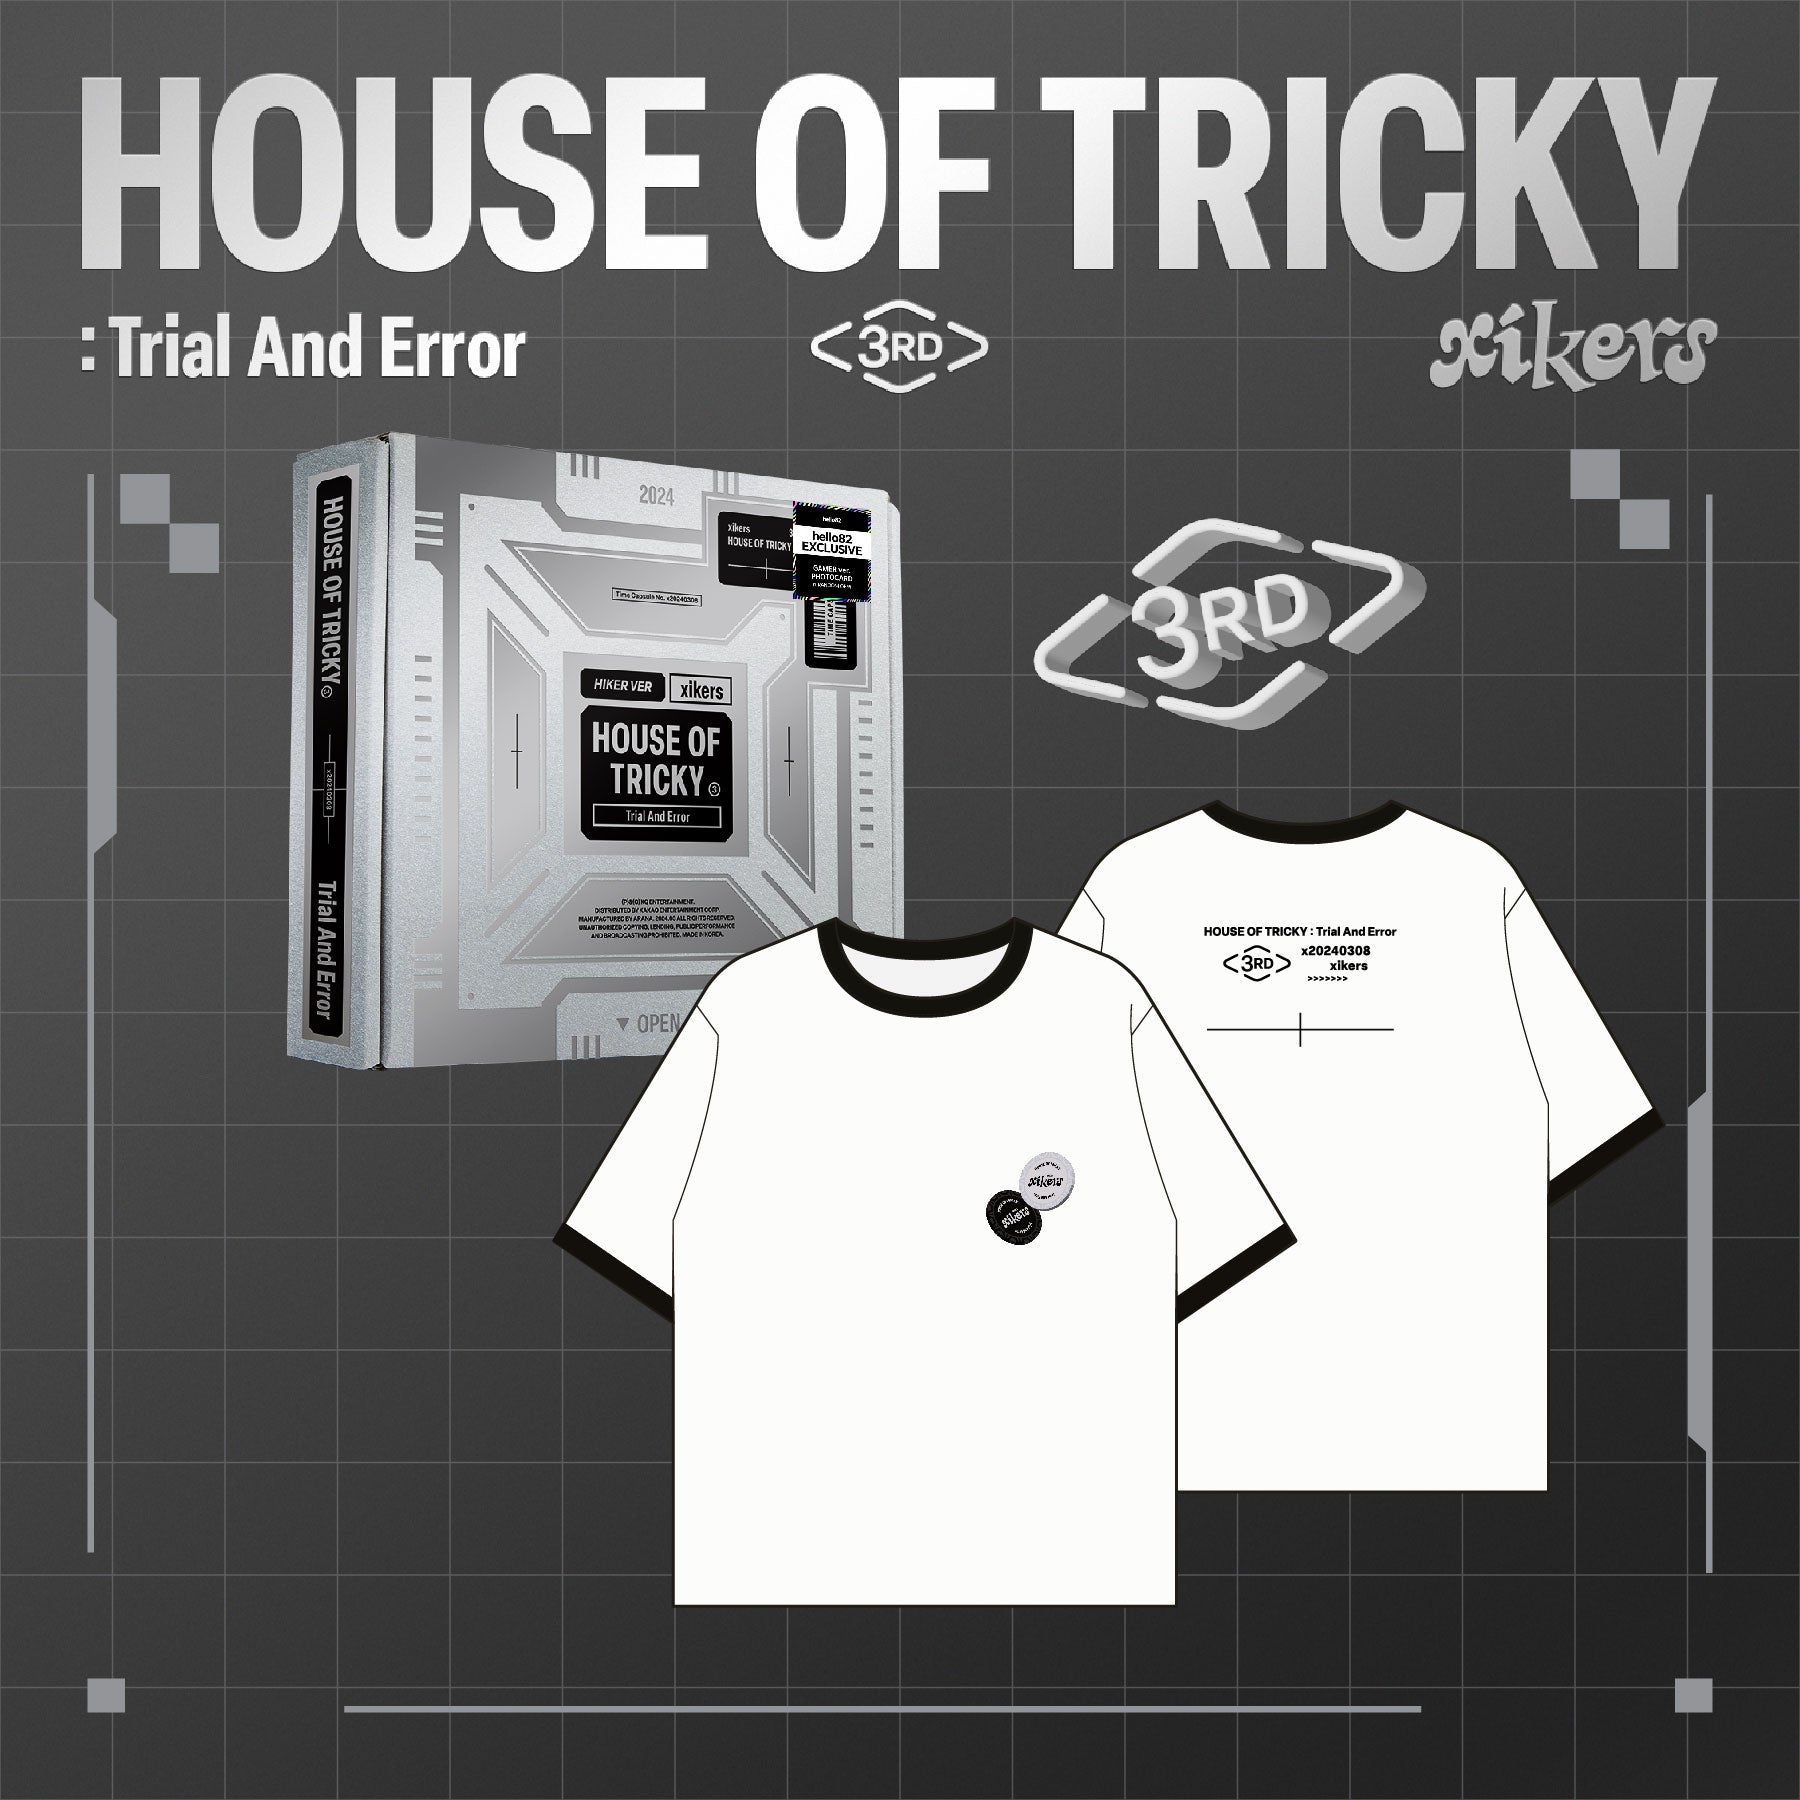 xikers - HOUSE OF TRICKY : Trial And Error - Fan Pack #1